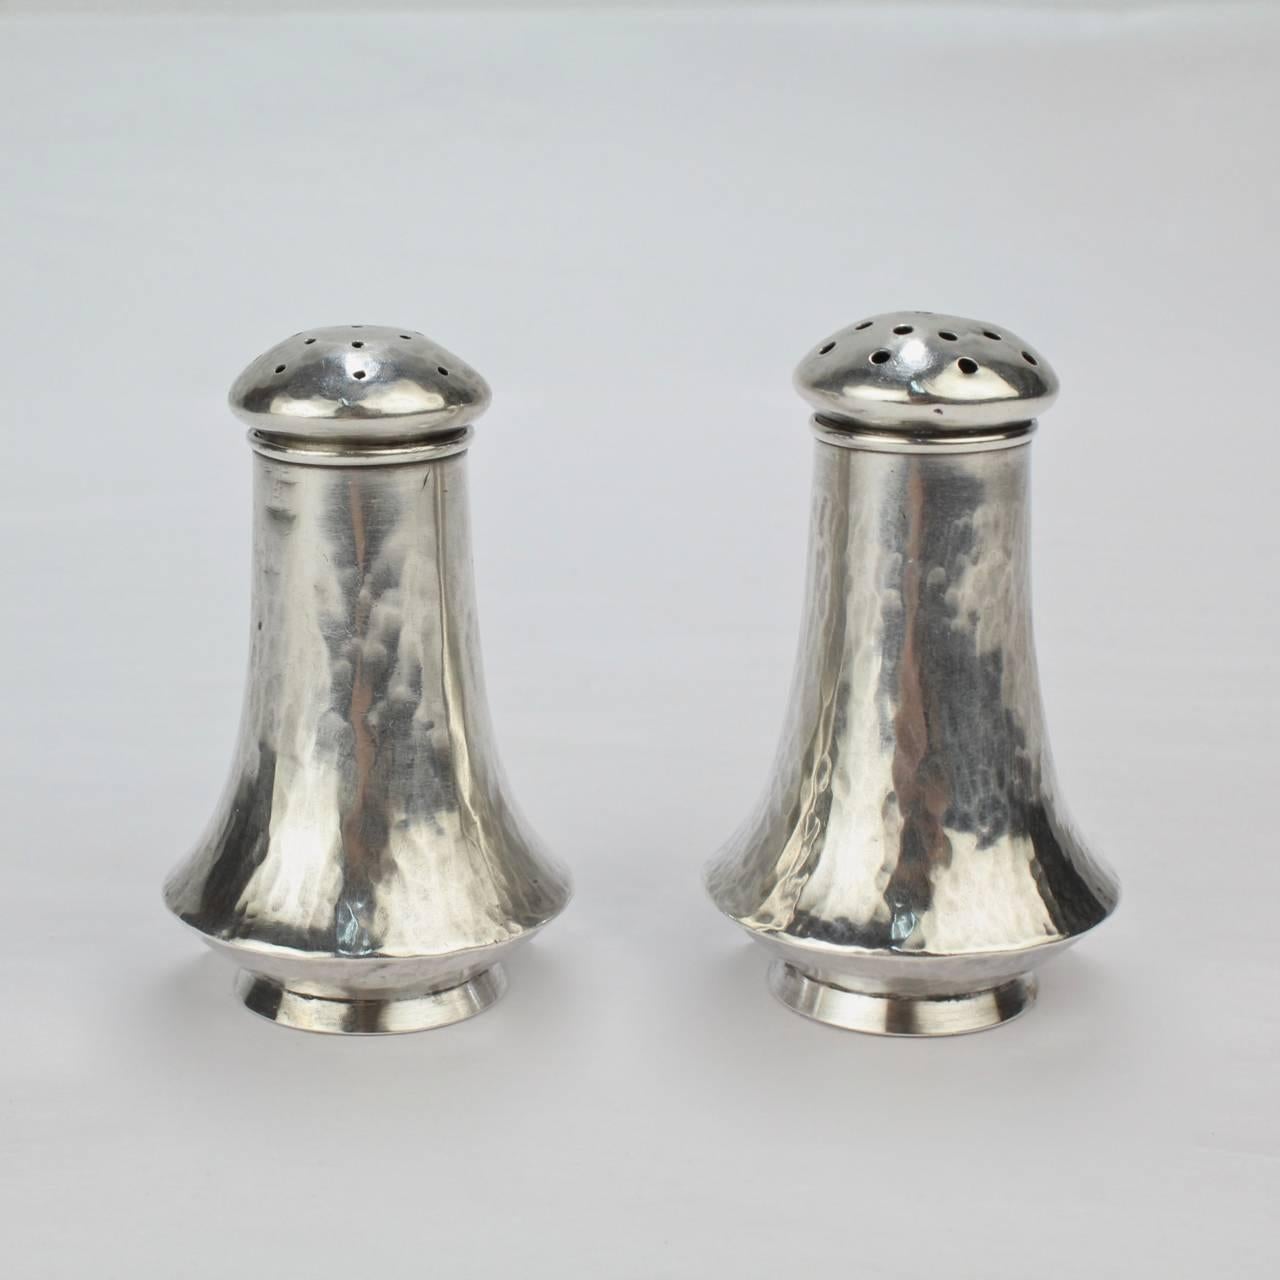 A fine pair of Clemens Friedel sterling silver hand made salt and pepper shakers.

Friedell was an important American Arts and Crafts studio silversmith in Pasadena, California in the 20th Century. Born in New Orleans, Friedell trained in Austria as